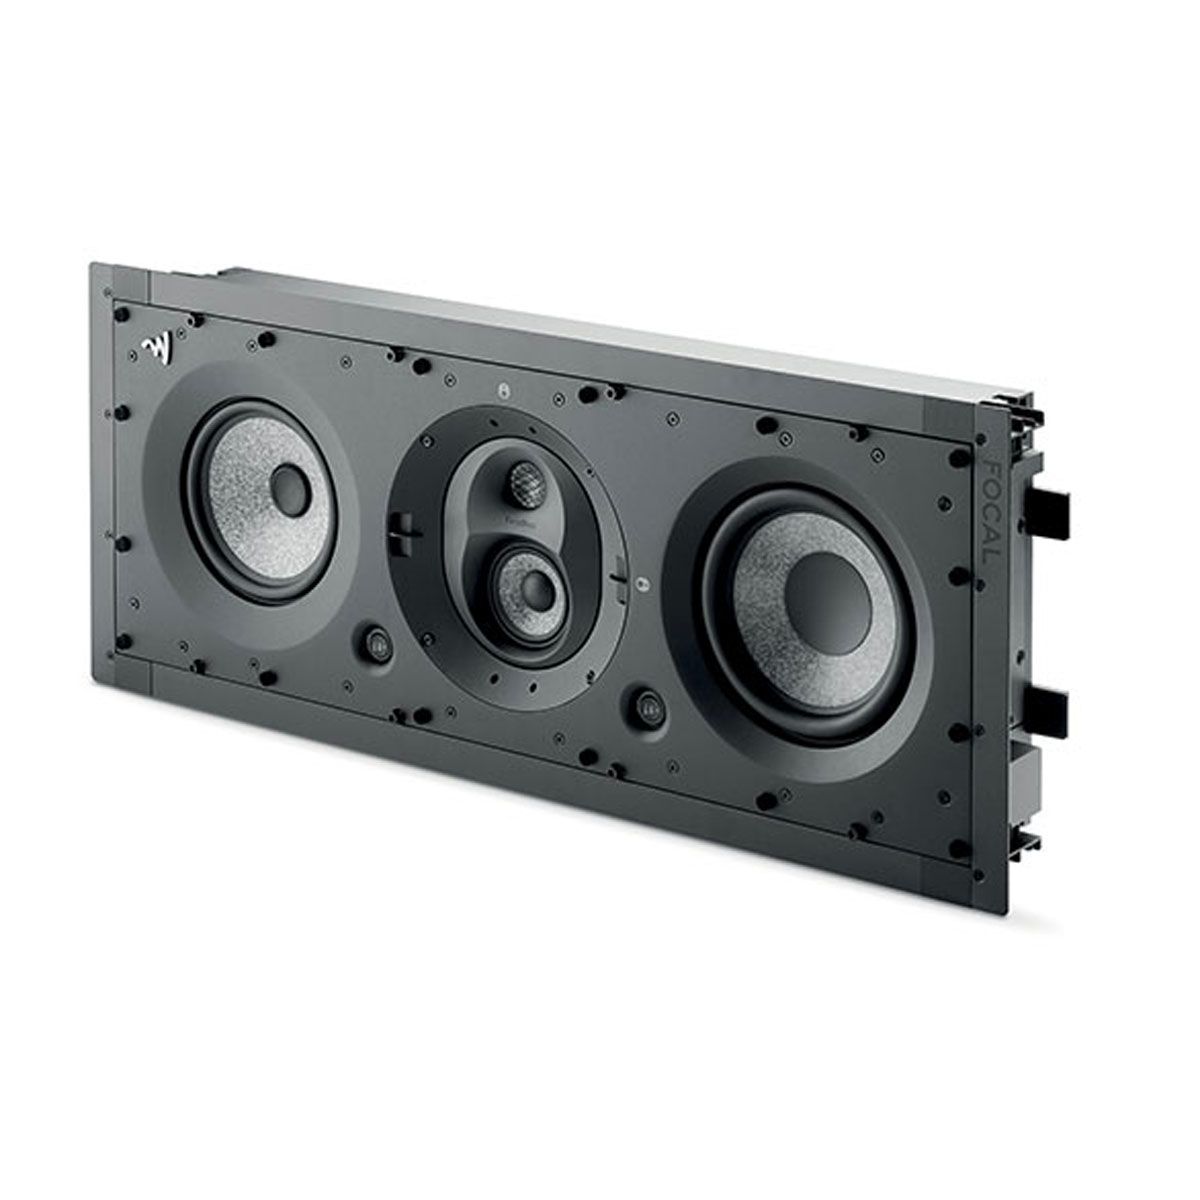 Focal 1000 IWLCR6 In-Wall Loudspeaker angled front view mounted horizontally